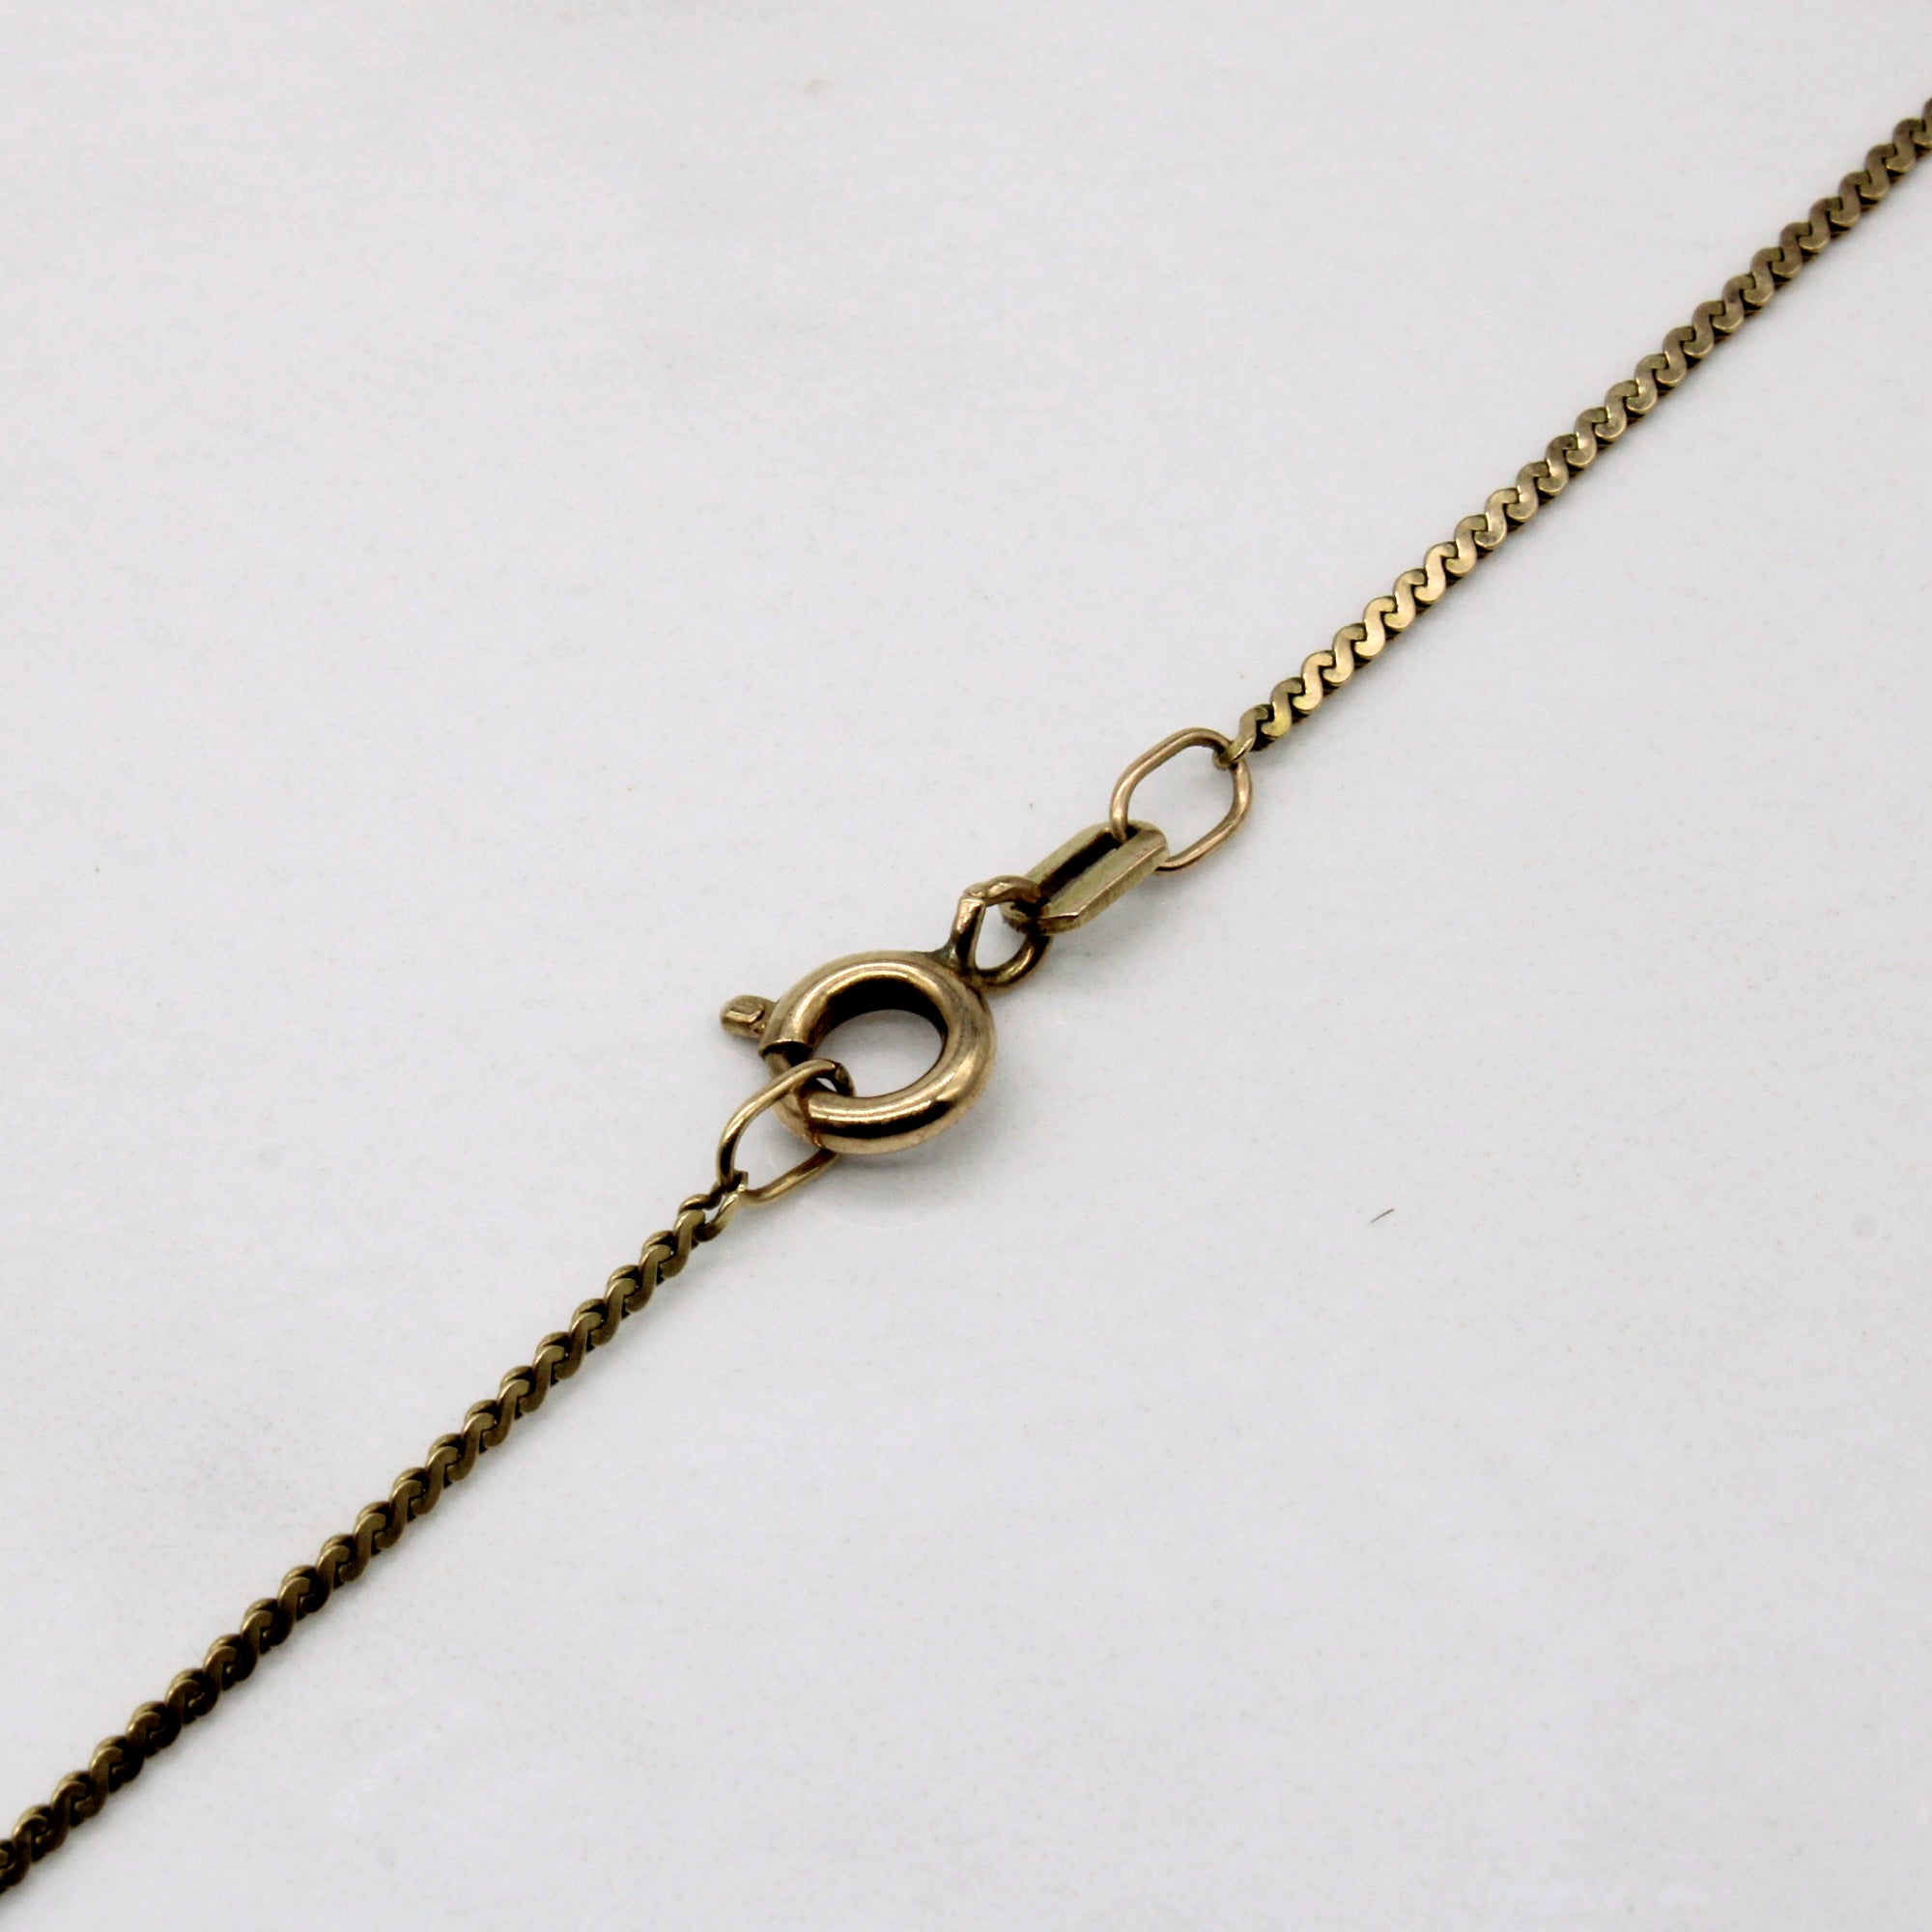 10k Yellow Gold S Link Chain | 17